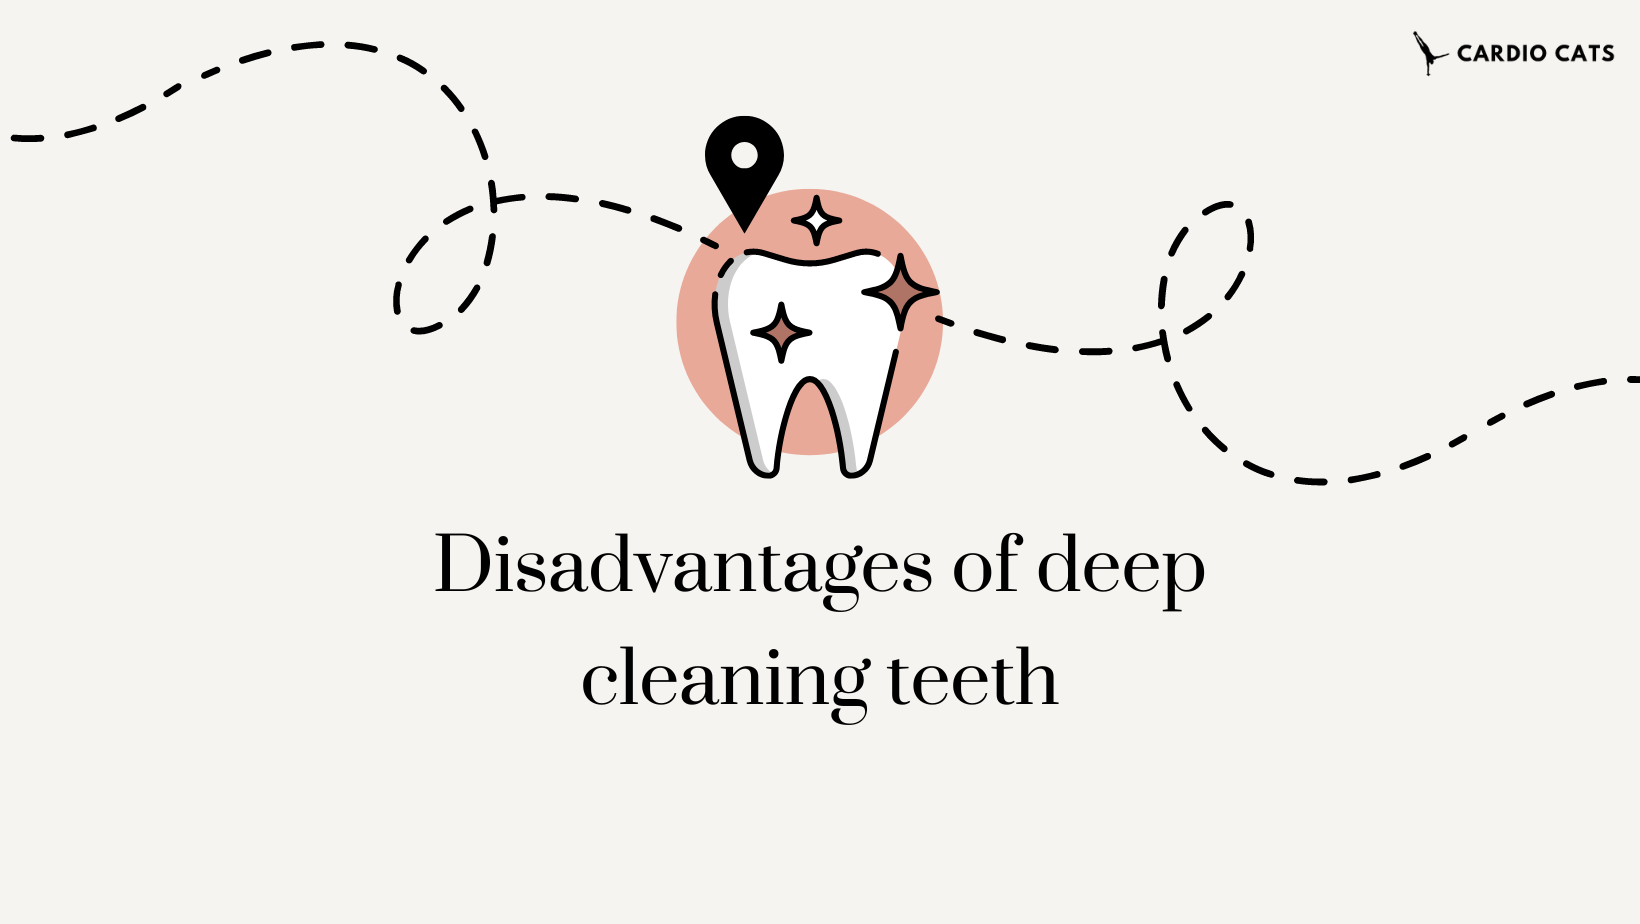 Disadvantages of Deep Cleaning Teeth: What You Need to Know